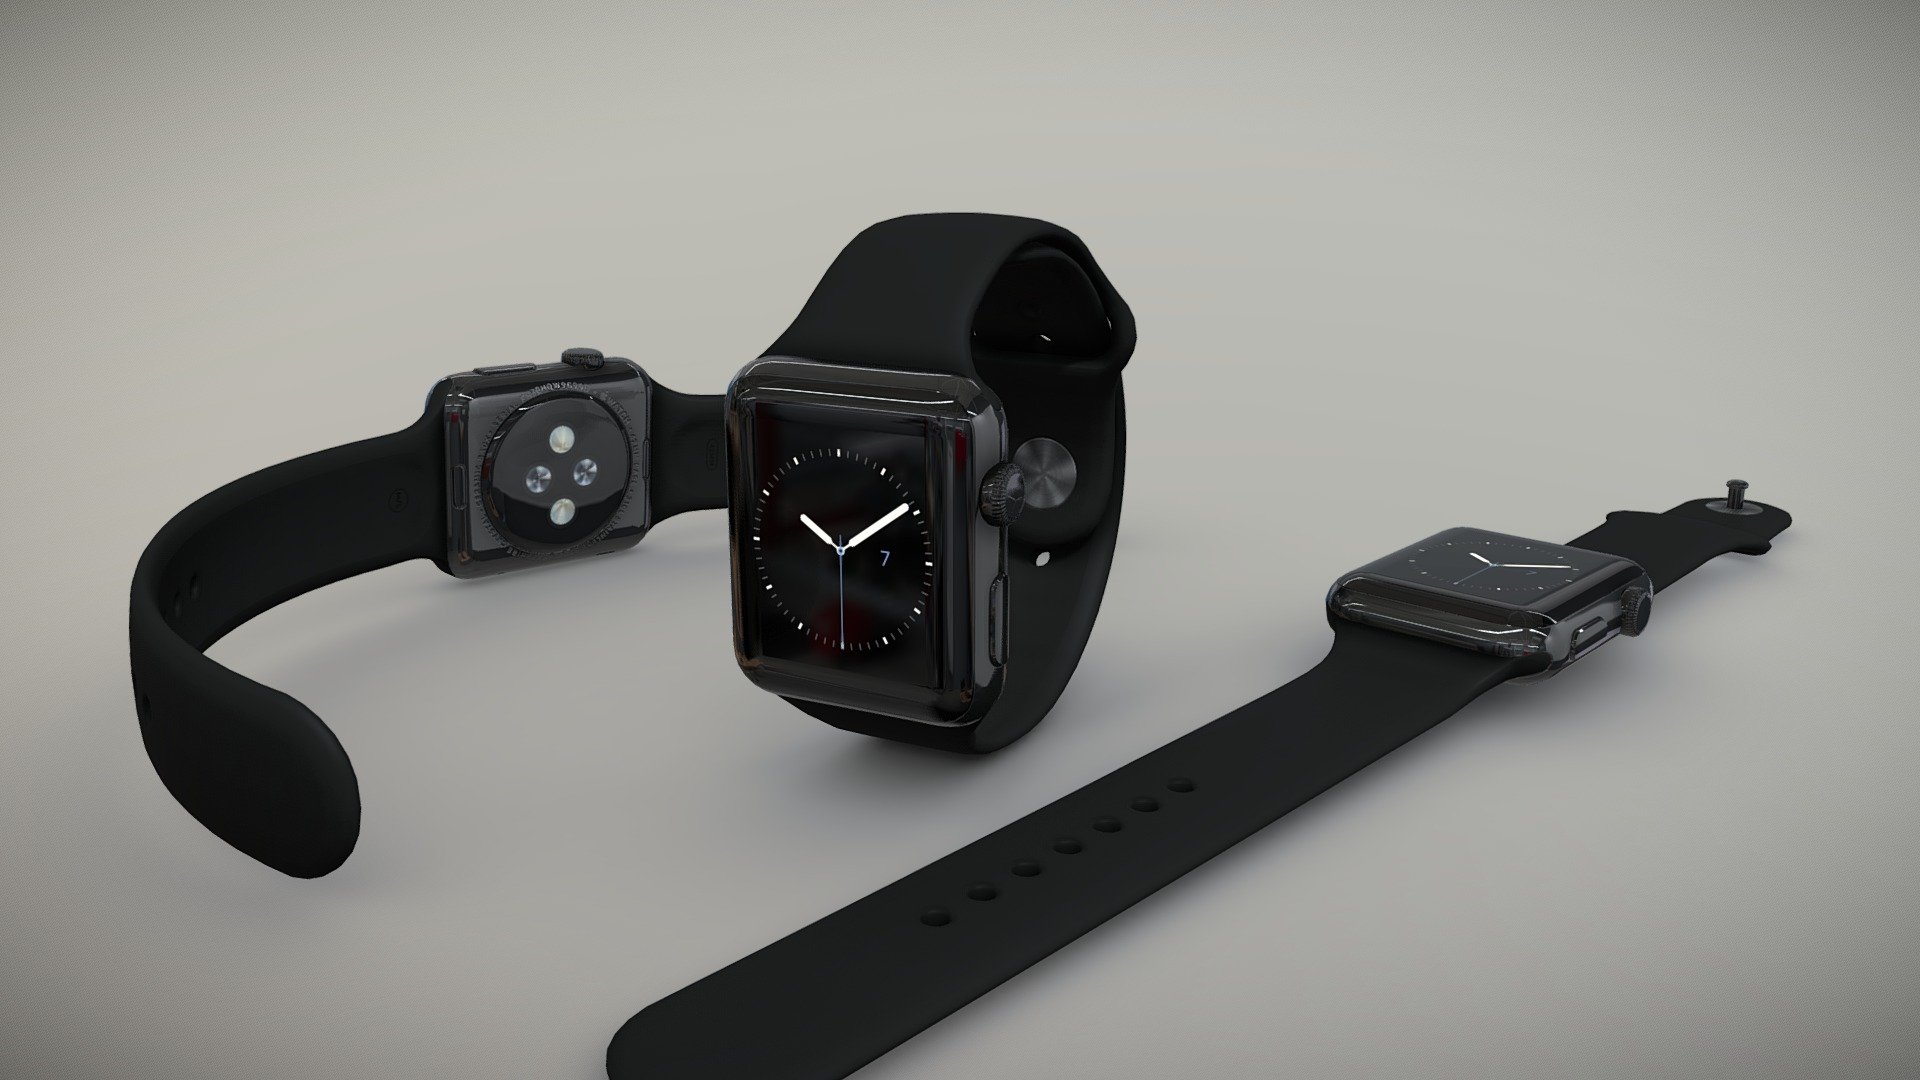 •   Let me present to you high-quality low-poly 3D model Apple Watch 42mm Space Black Stainless Steell Case with Black Sport Band. Modeling was made with ortho-photos of real watch that is why all details of design are recreated most authentically.

•    This model consists of two meshes, it is low-polygonal and it has only one material. 

•   The total of the main textures is 5. Resolution of all textures is 4096 pixels square aspect ratio in .png format. Also there is original texture file .PSD format in separate archive.

•   Polygon count of the model is – 4294.

•   The model has correct dimensions in real-world scale. All parts grouped and named correctly.

•   To use the model in other 3D programs there are scenes saved in formats .fbx, .obj, .DAE, .max (2010 version).

Note: If you see some artifacts on the textures, it means compression works in the Viewer. We recommend setting HD quality for textures. But anyway, original textures have no artifacts 3d model